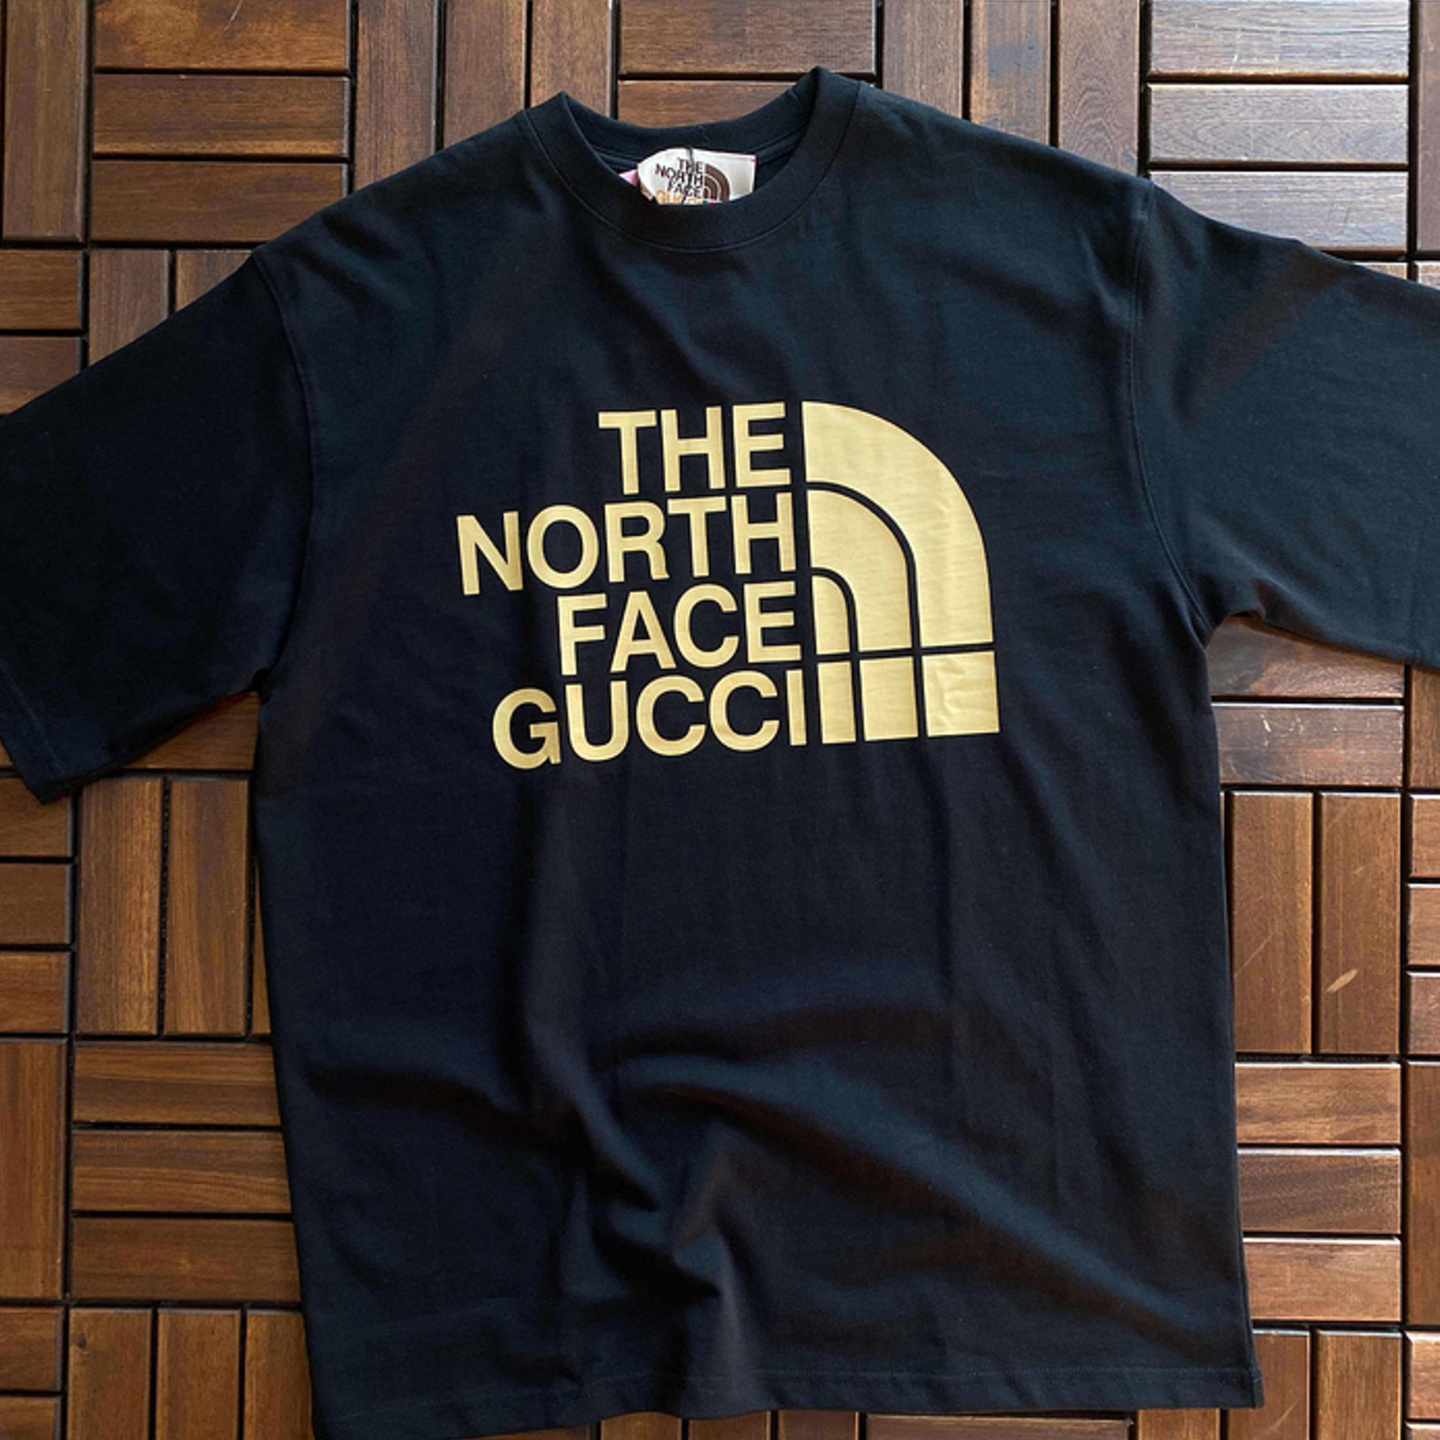 The North Face x Gucci T shirt